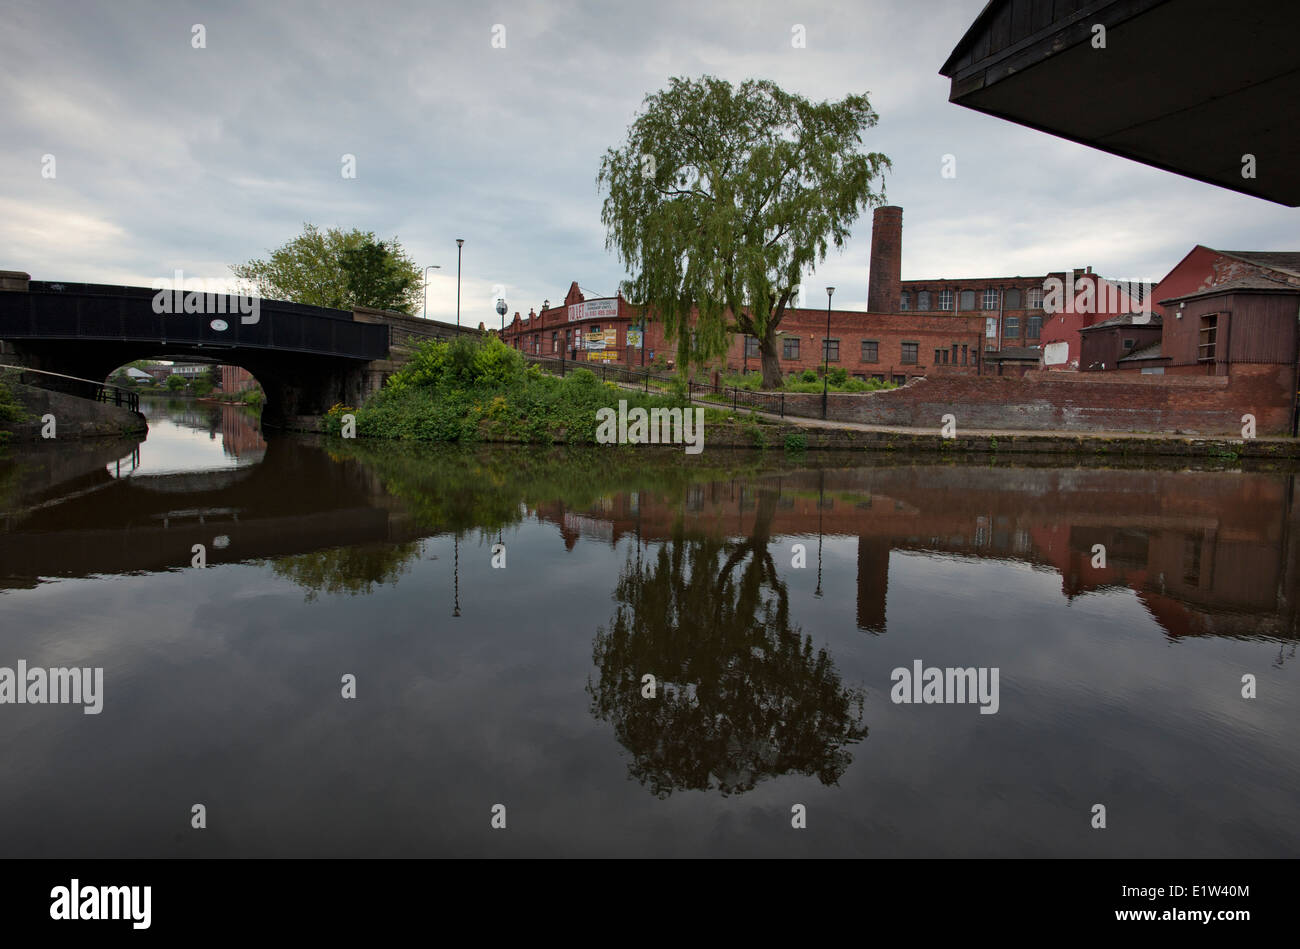 Wigan, Wigan Pier, Greater Manchester, England, UK.  June 2014 Wigan Pier by George Orwell in his searing condemnation of class. Stock Photo